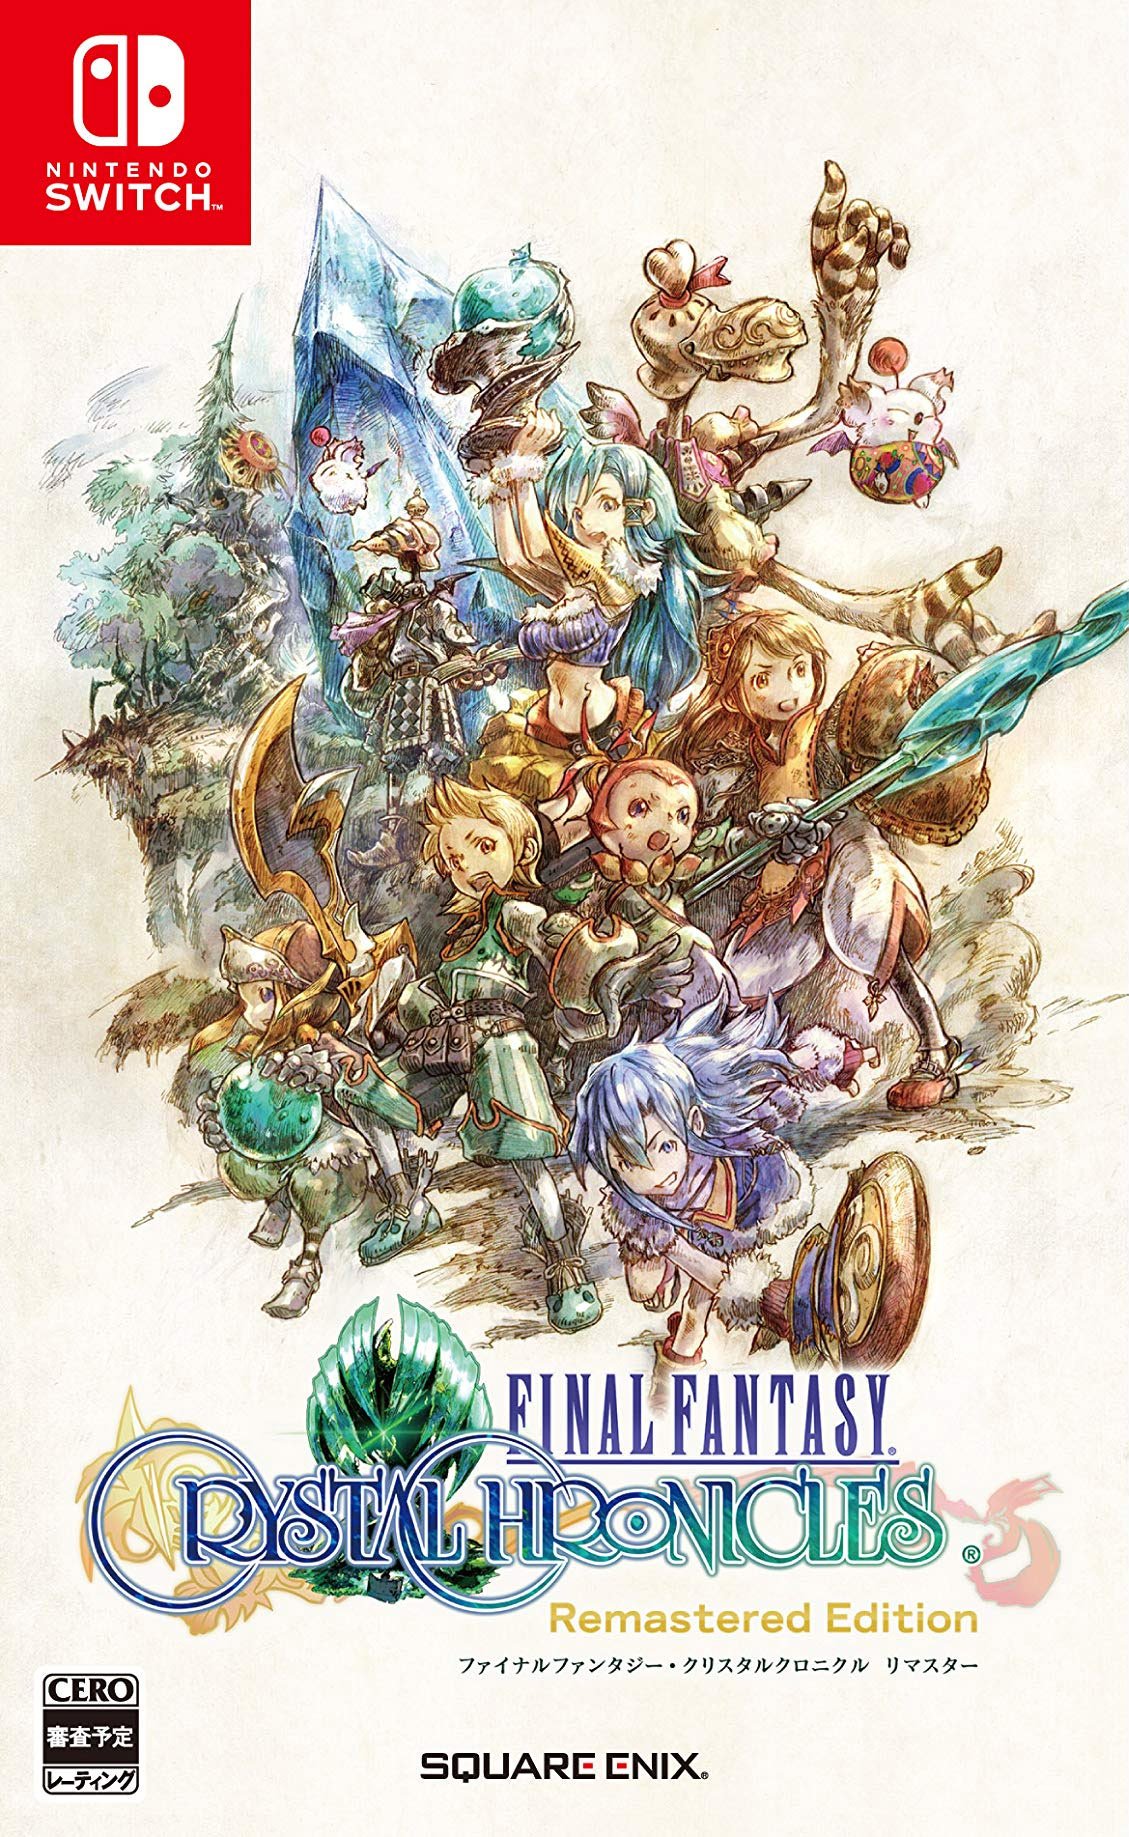 Final fantasy crystal chronicles remastered edition jaquette switch